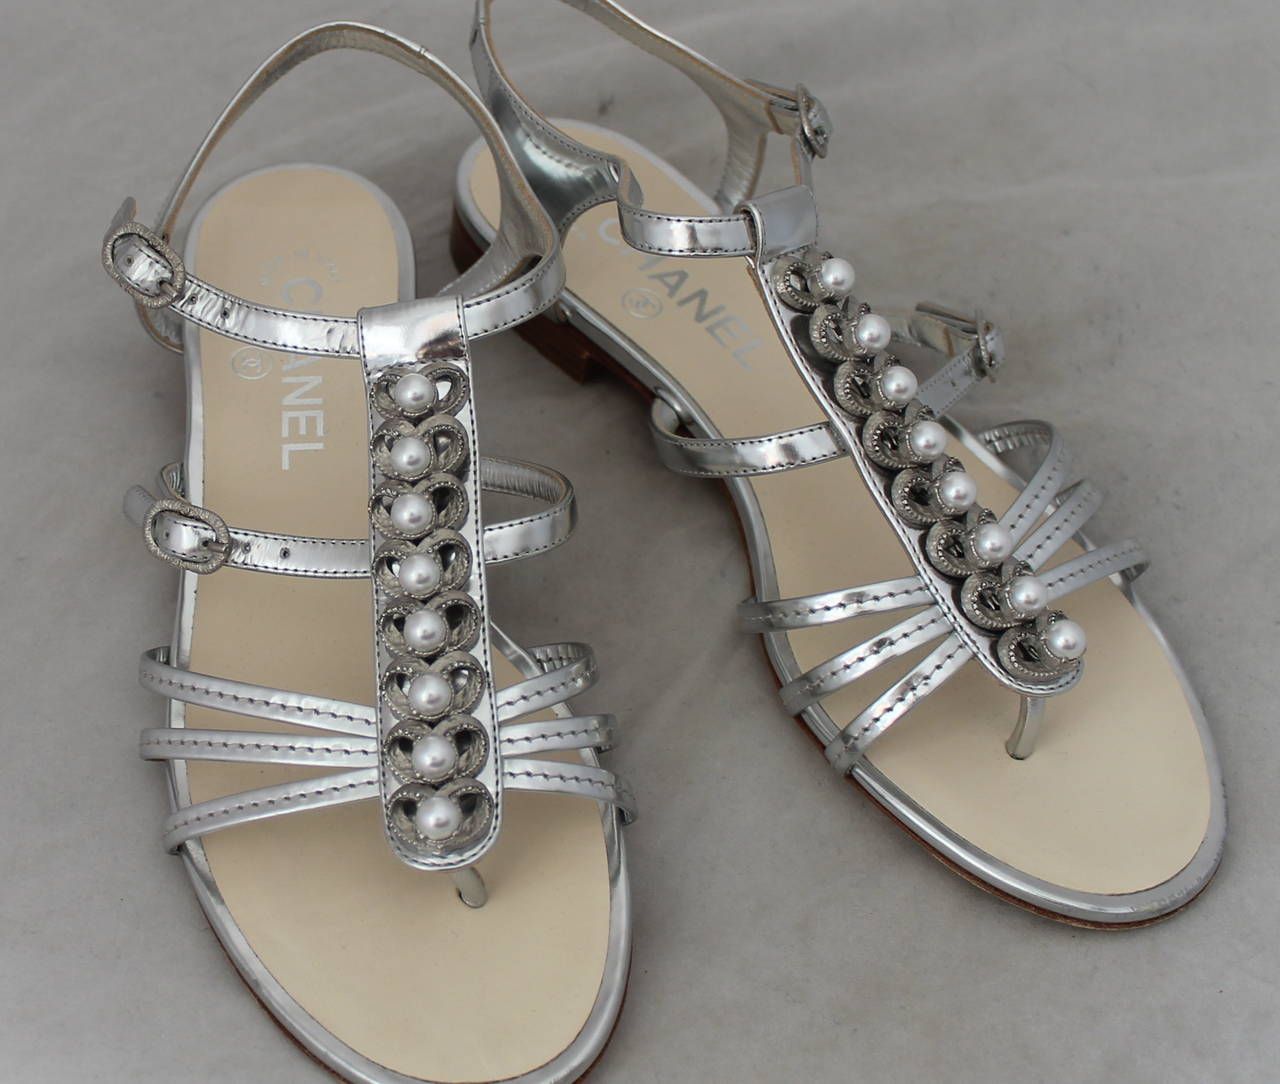 Chanel Silver Metallic Gladiator Sandals with Pearls - 38.5. These shoes are in excellent condition with minor wear on the bottom.